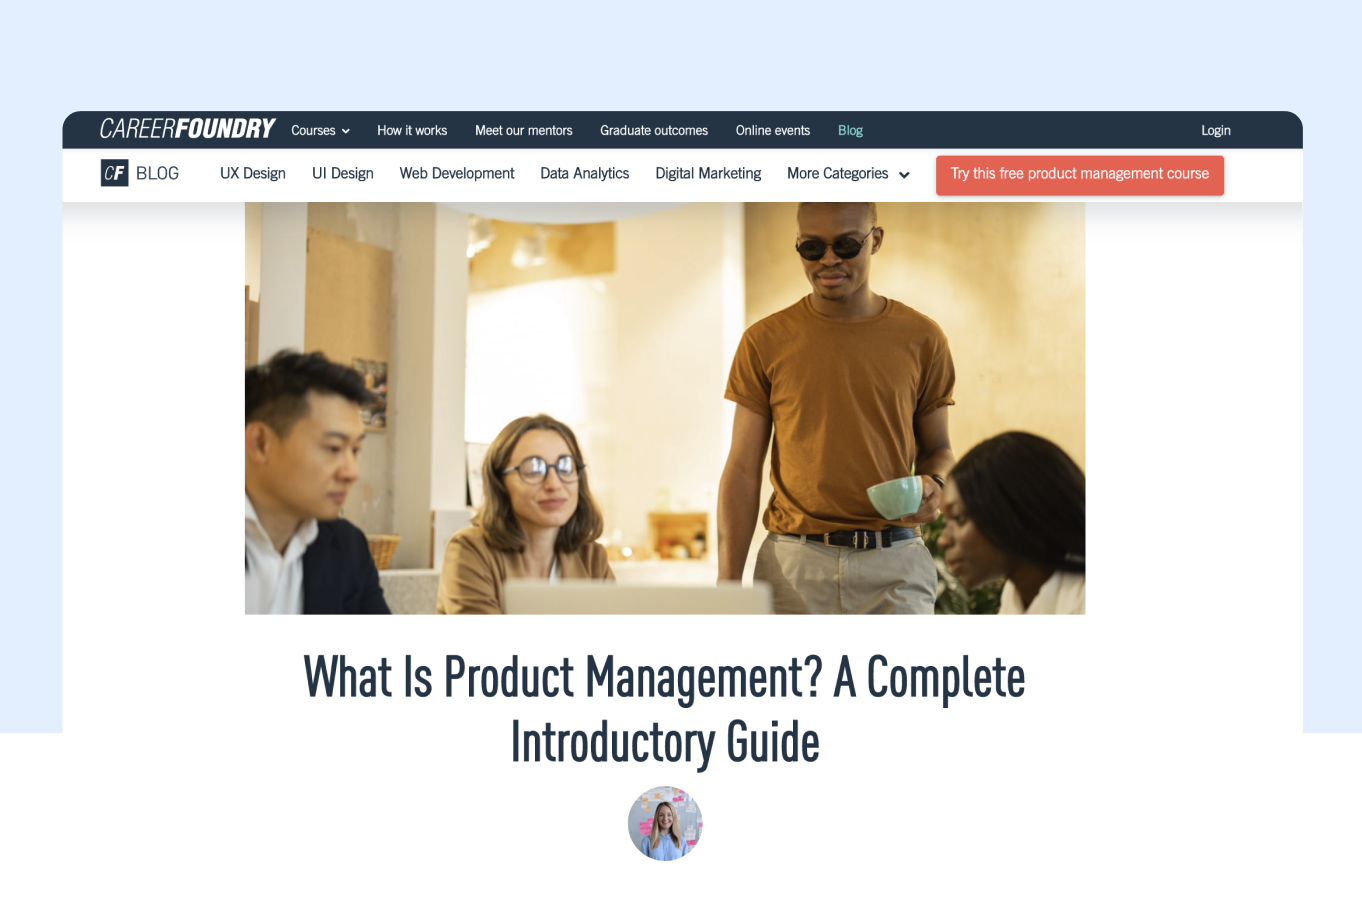 What is product management? A complete introductory guide